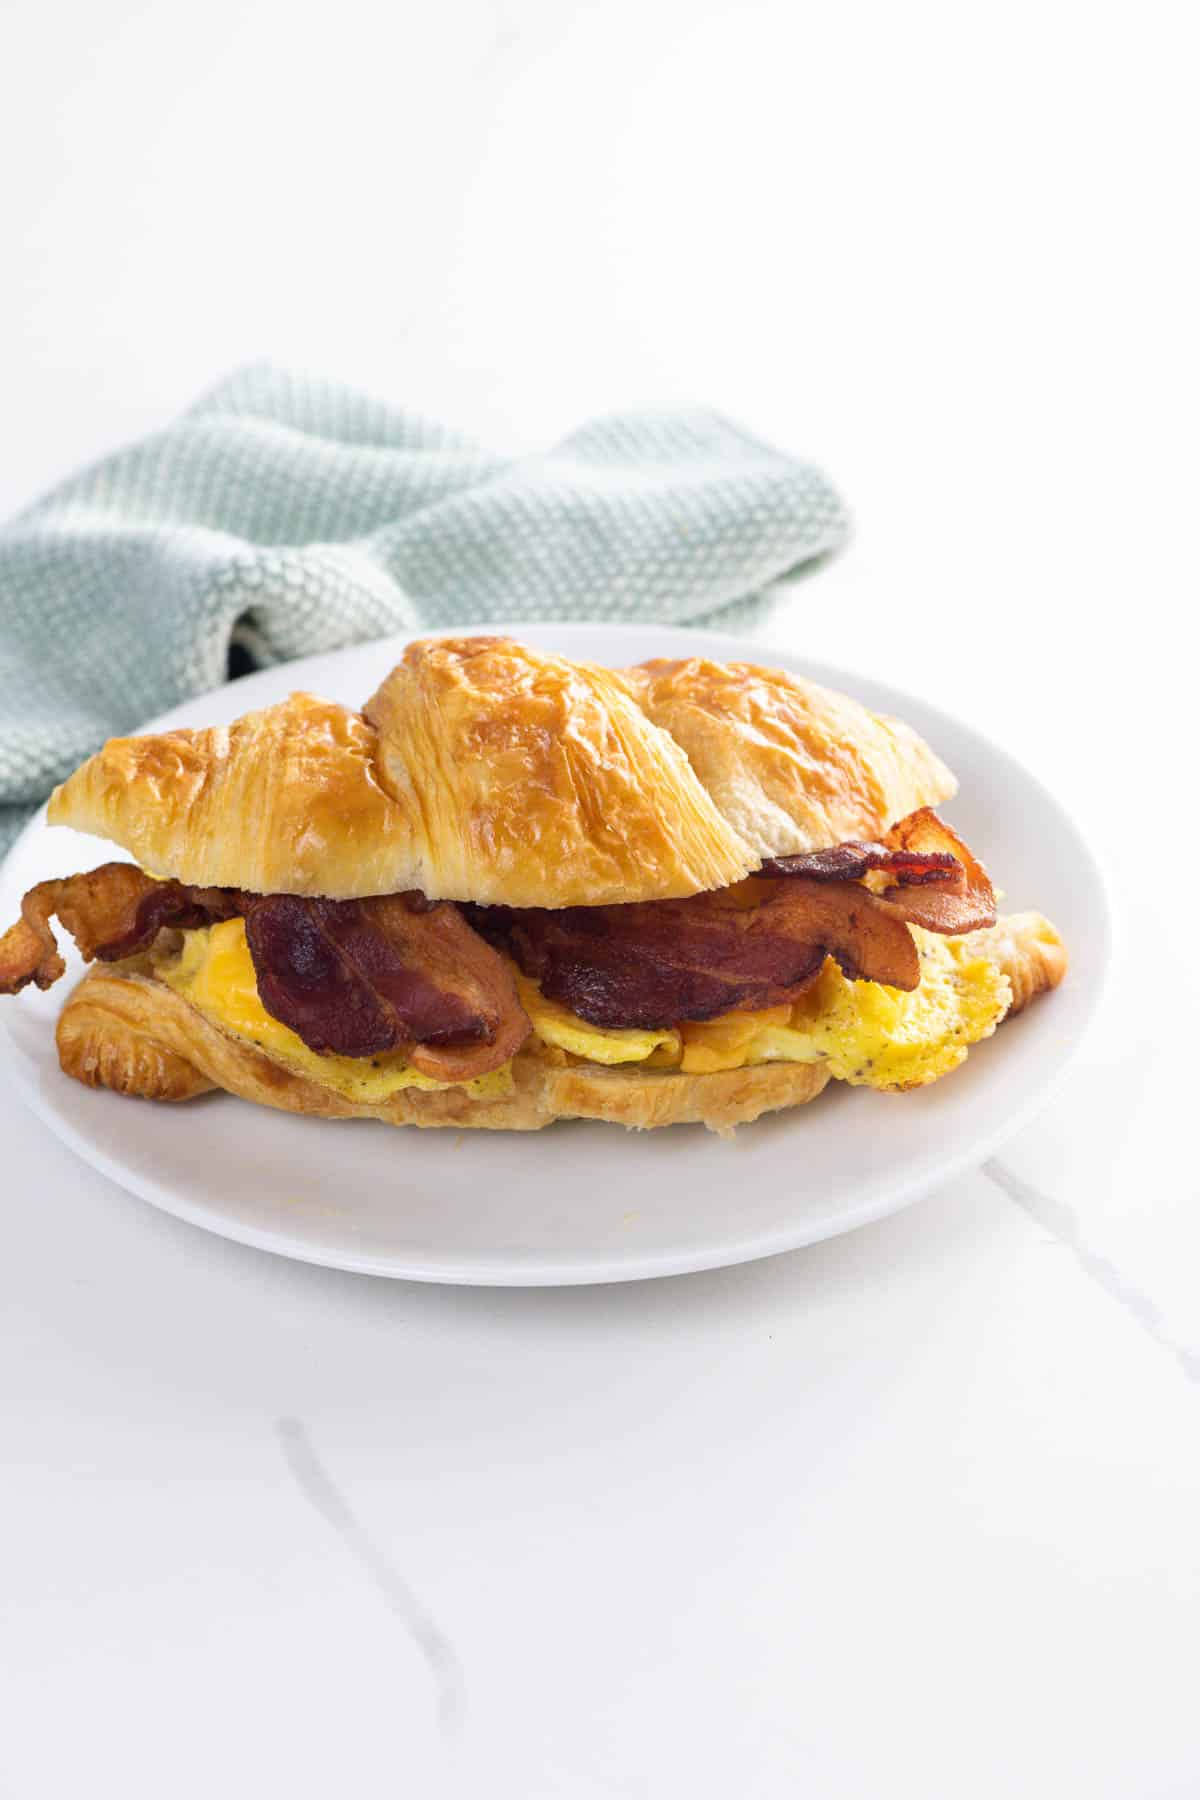 a bacon egg and cheese croissant on a plate with a napkin